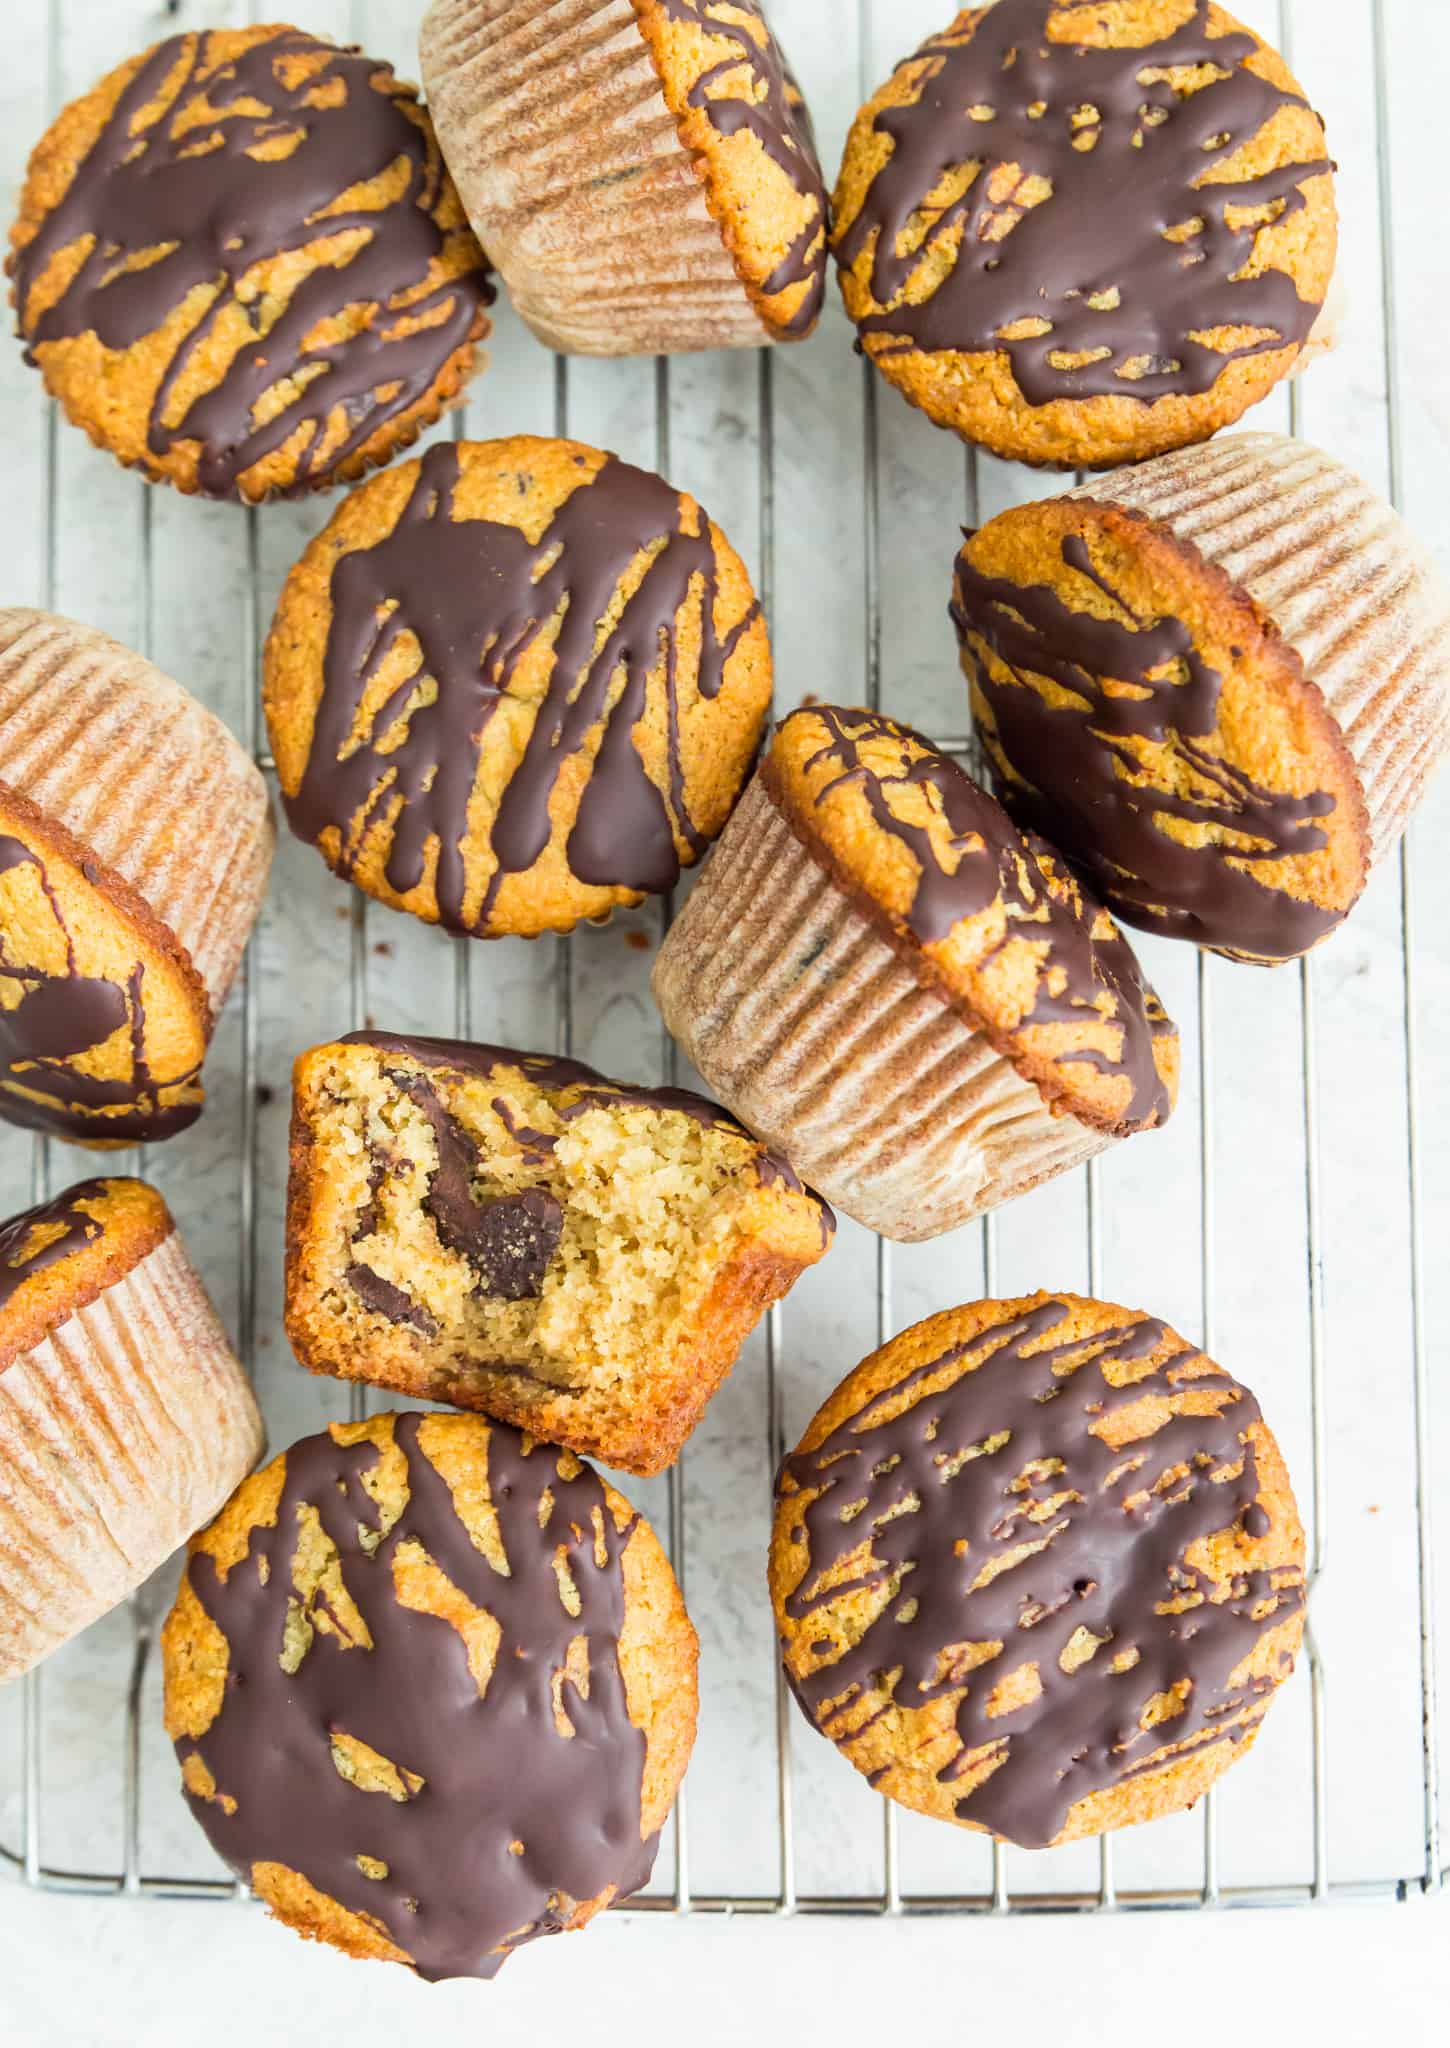 Paleo orange chocolate muffins on a rack with a bite out of one of the muffins.